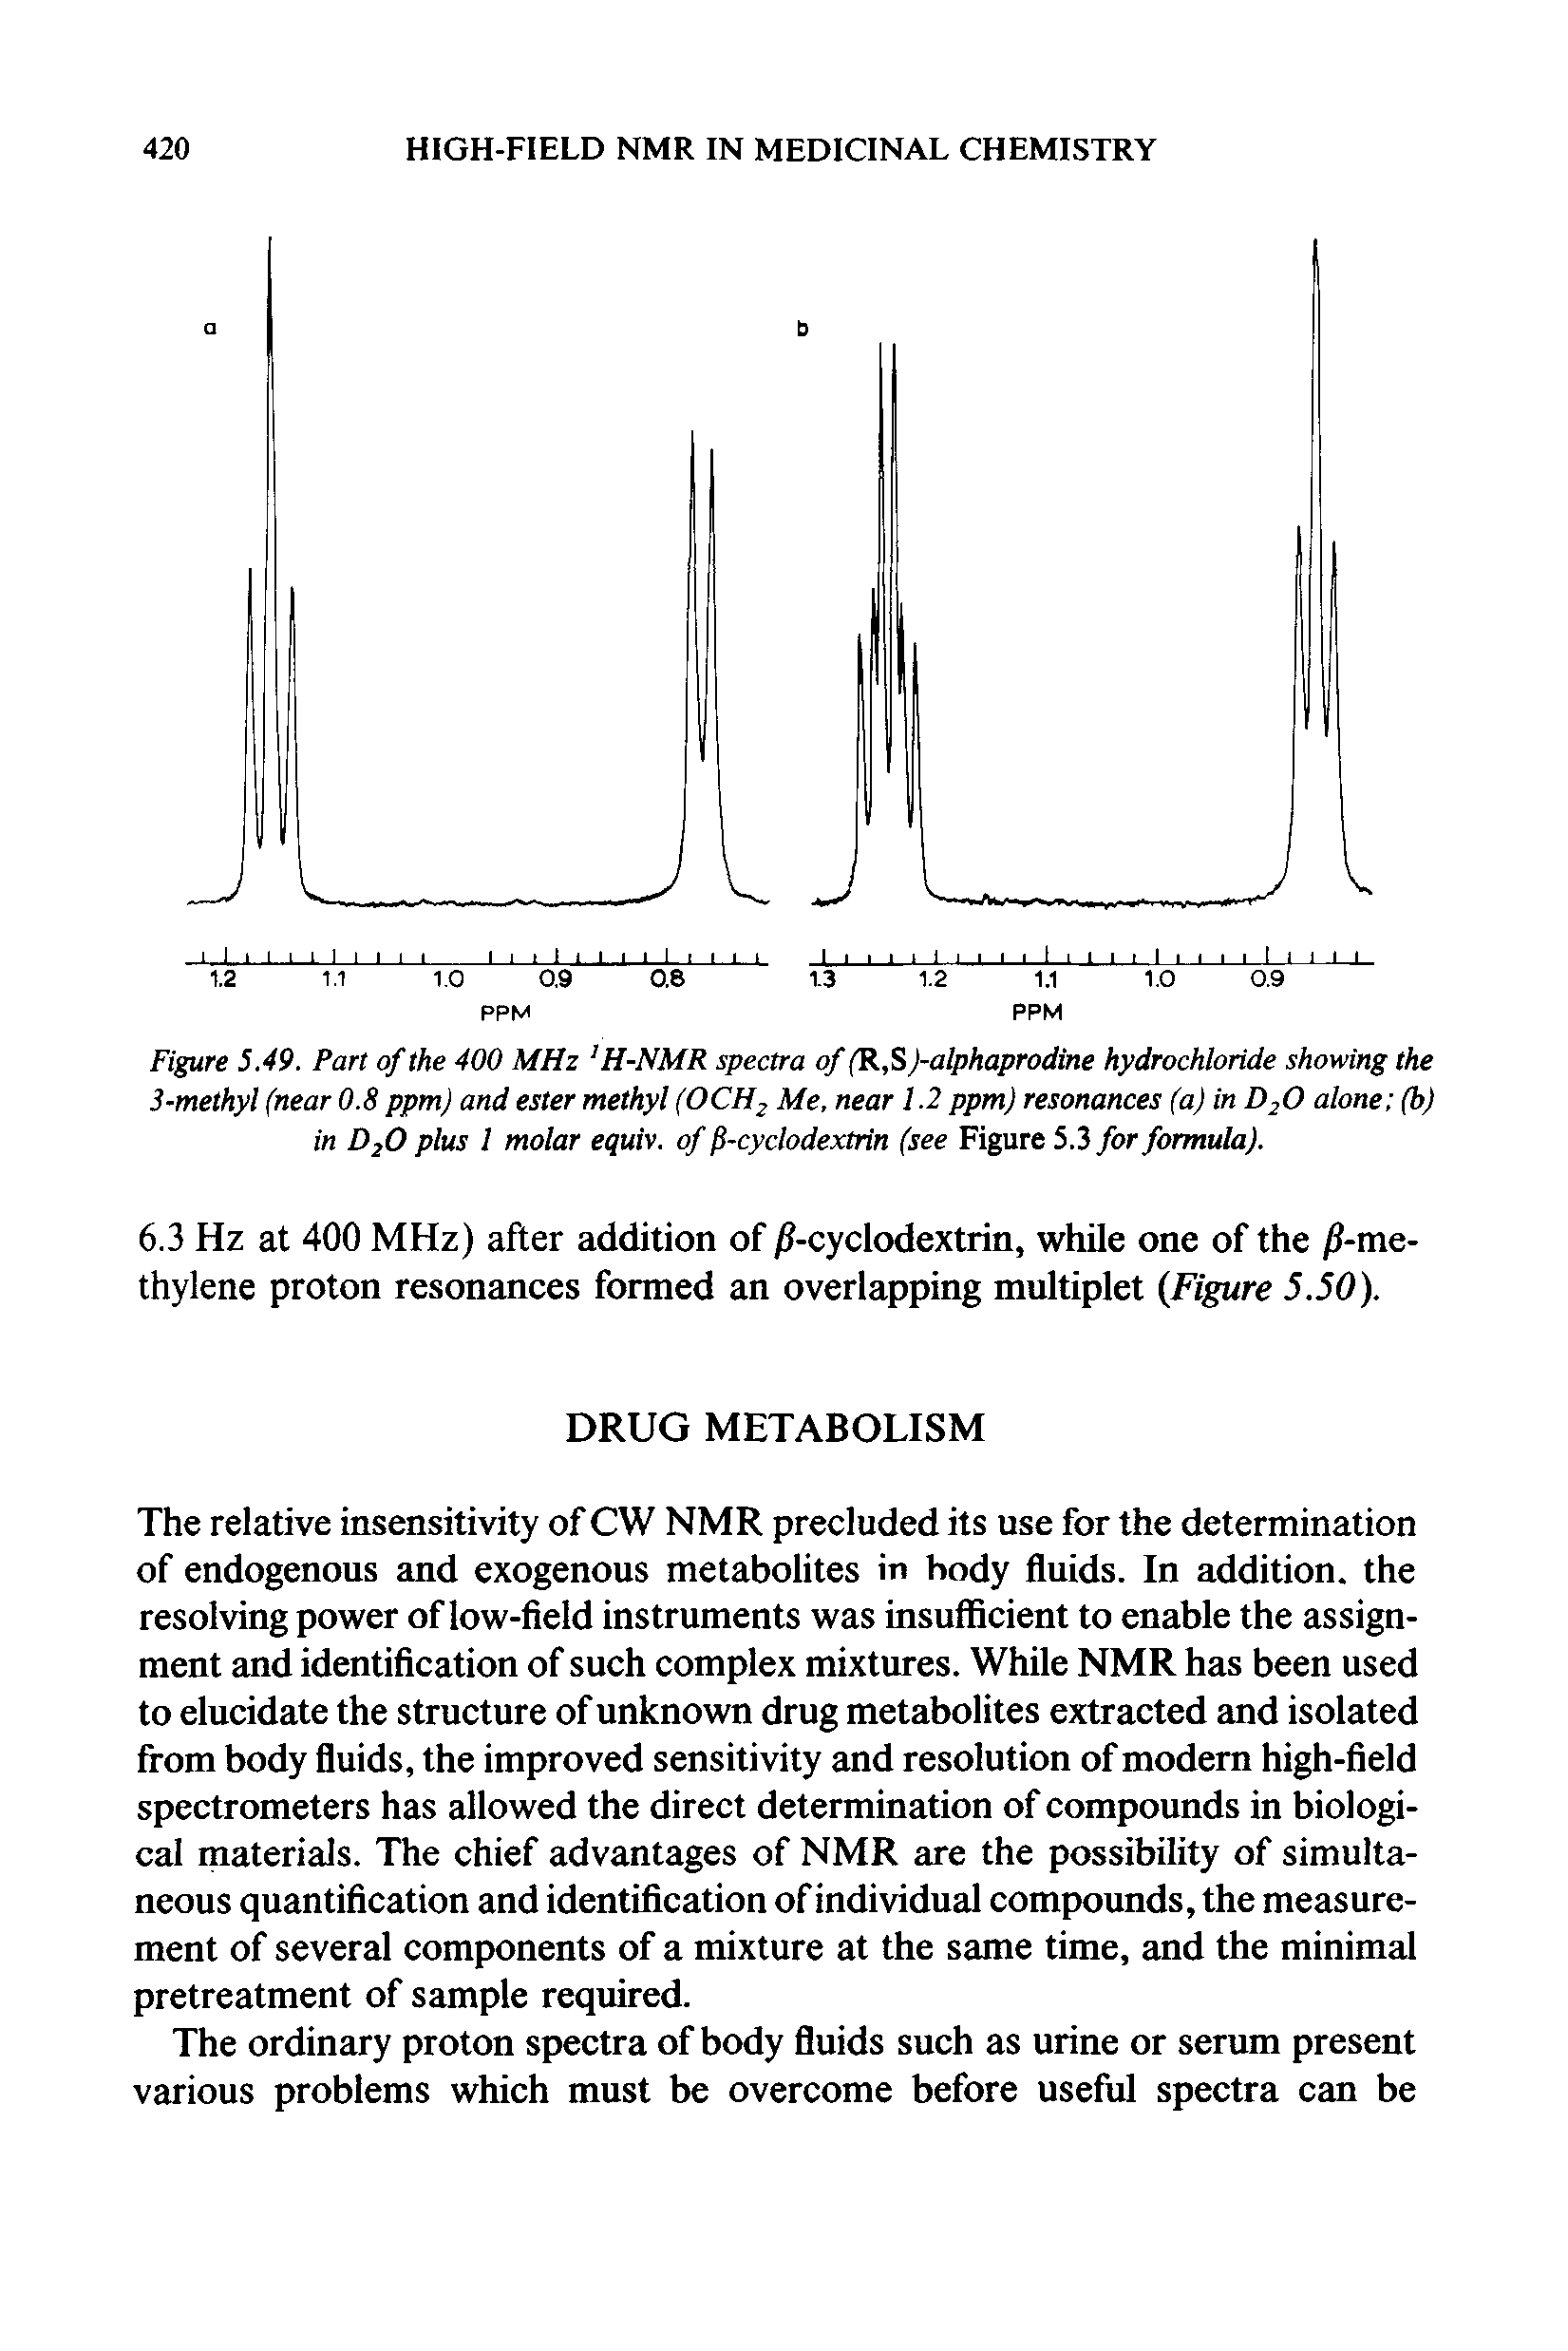 Figure 5.49. Part of the 400 MHz H-NMR spectra of (R,S j-alphaprodine hydrochloride showing the 3-methyl (near 0.8 ppm) and ester methyl (OCH Me, near 1.2 ppm) resonances (a) in D2O alone (b) in D2O plus 1 molar equiv. of f-cyclodextrin (see Figure 5.3 for formula).